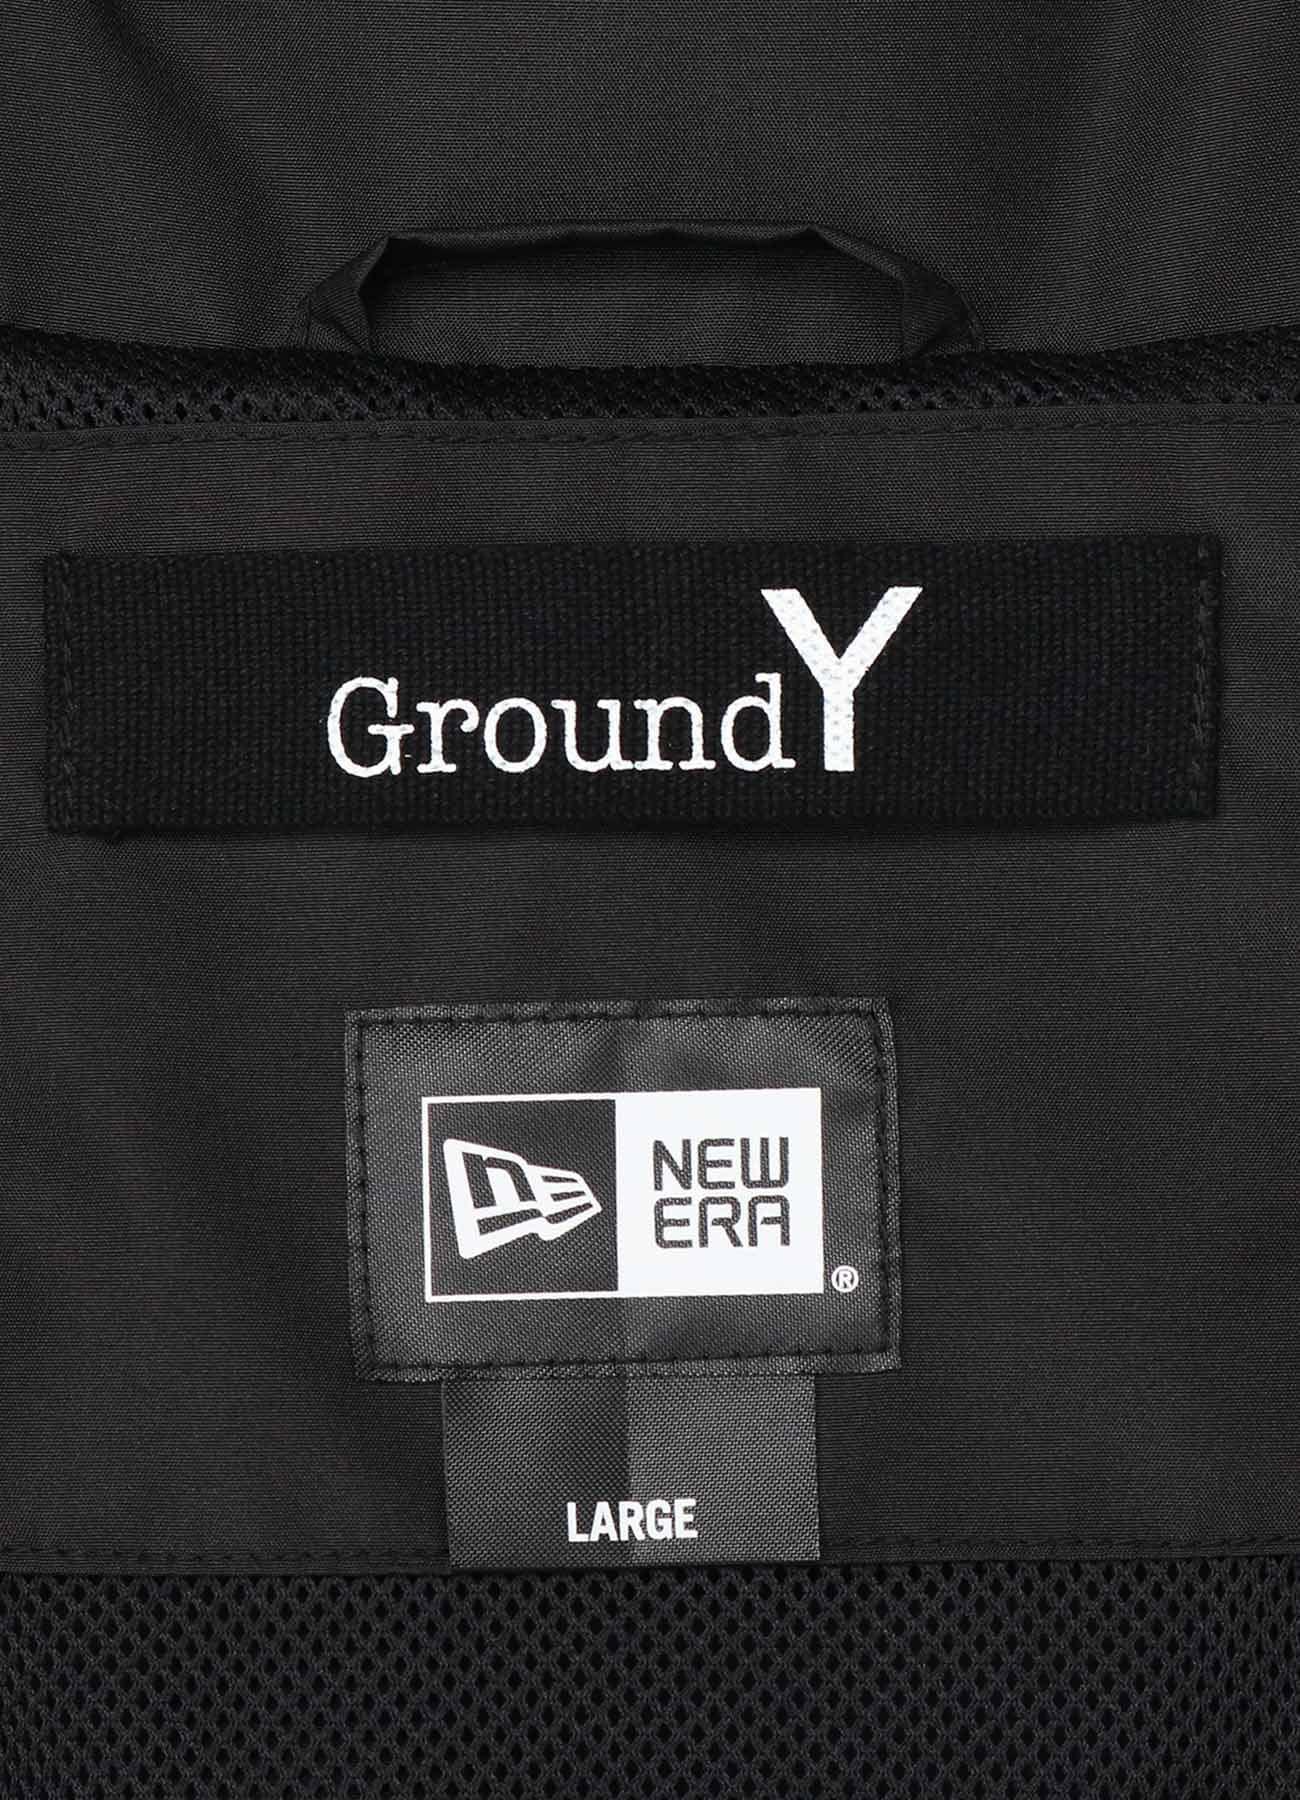 Ground Y × NEW ERA Collection Coach Jacket (S Black): GroundY 